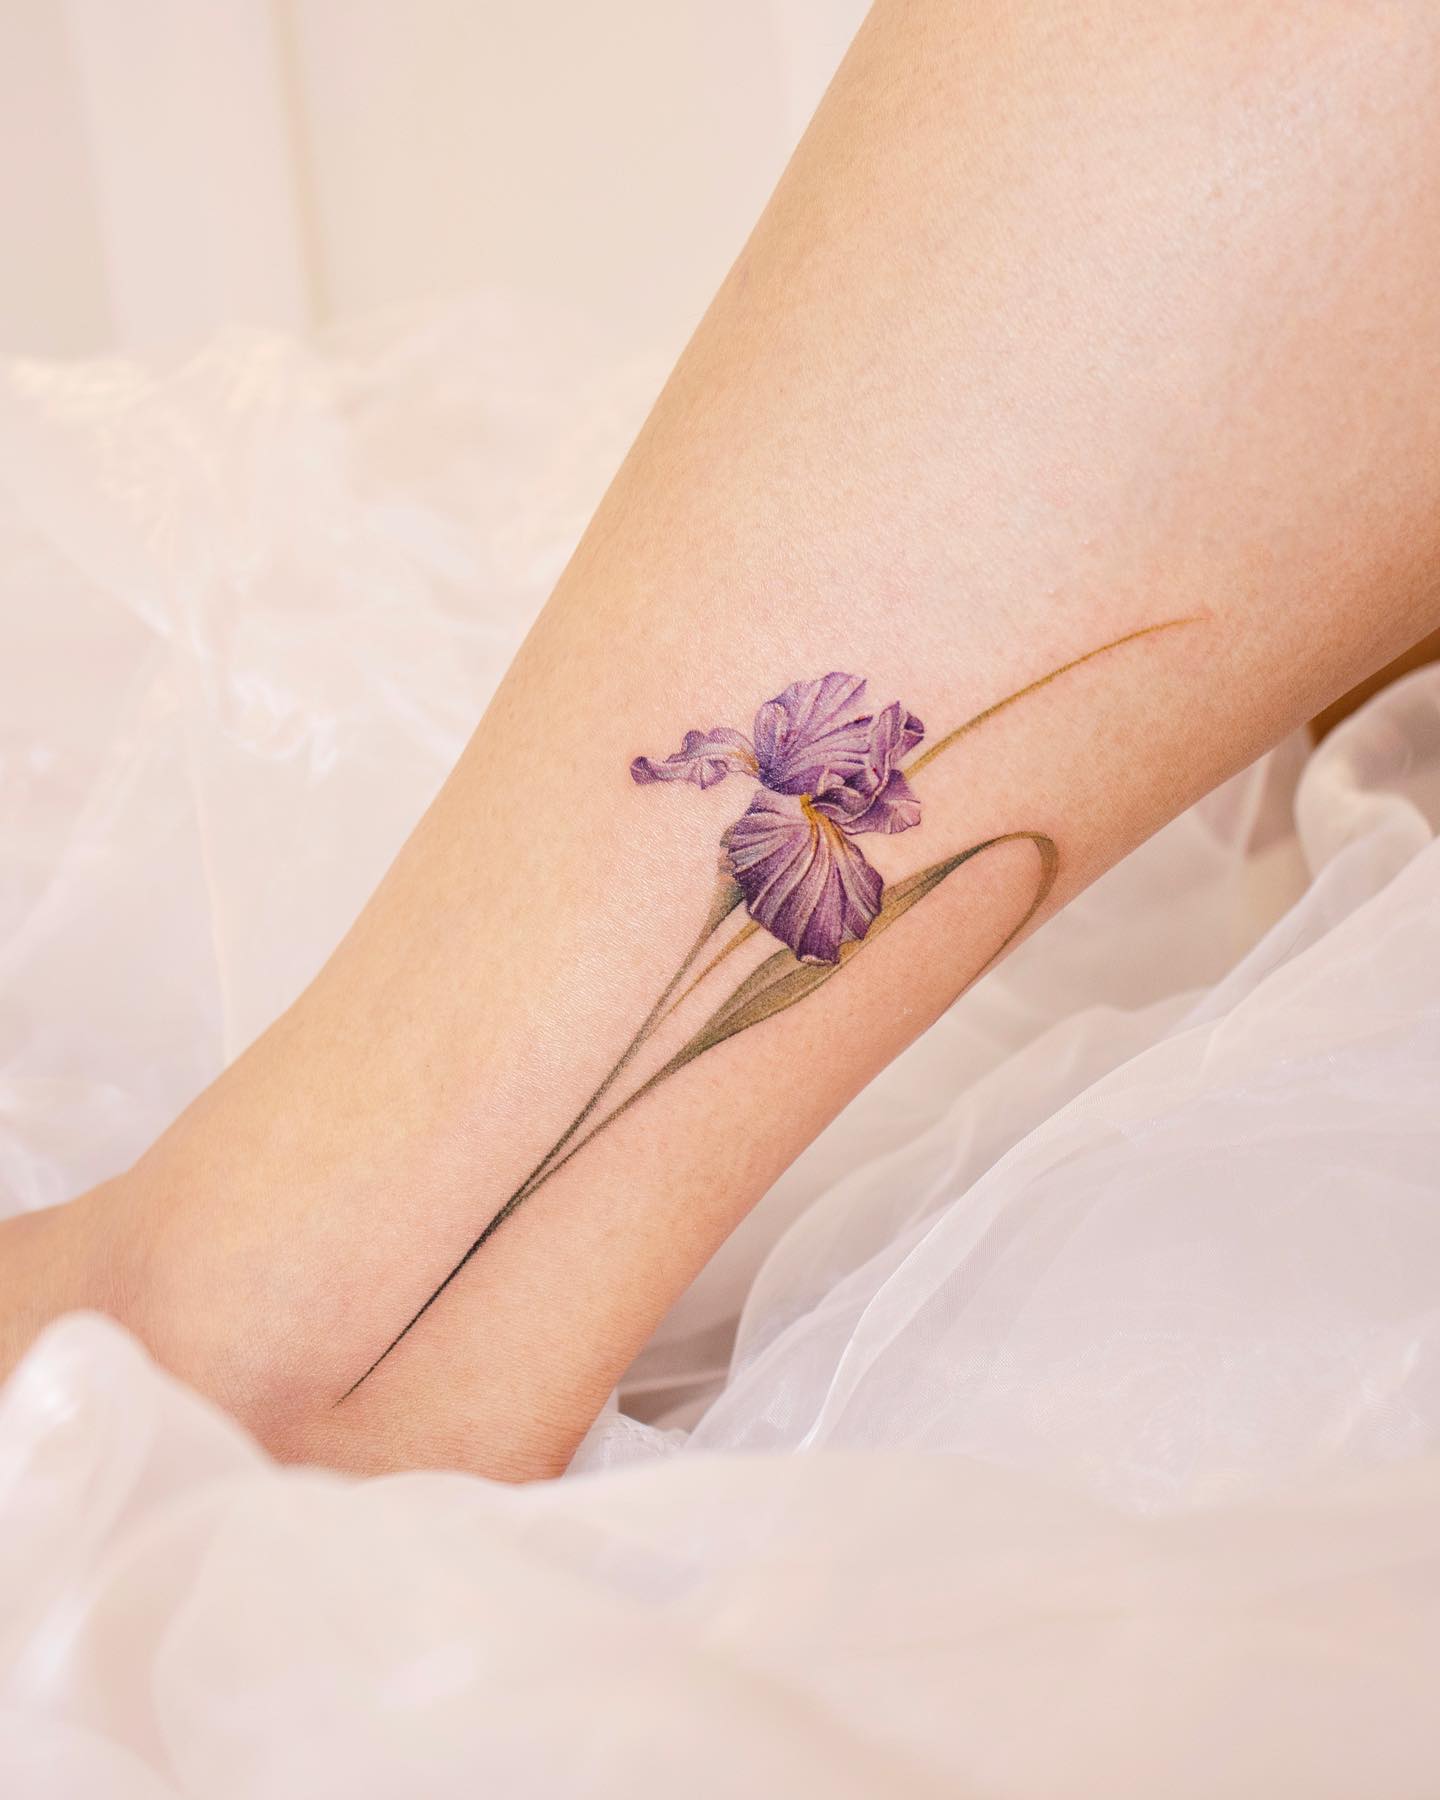 54 Classic Floral Tattoo Ideas for Spring - TattooBlend